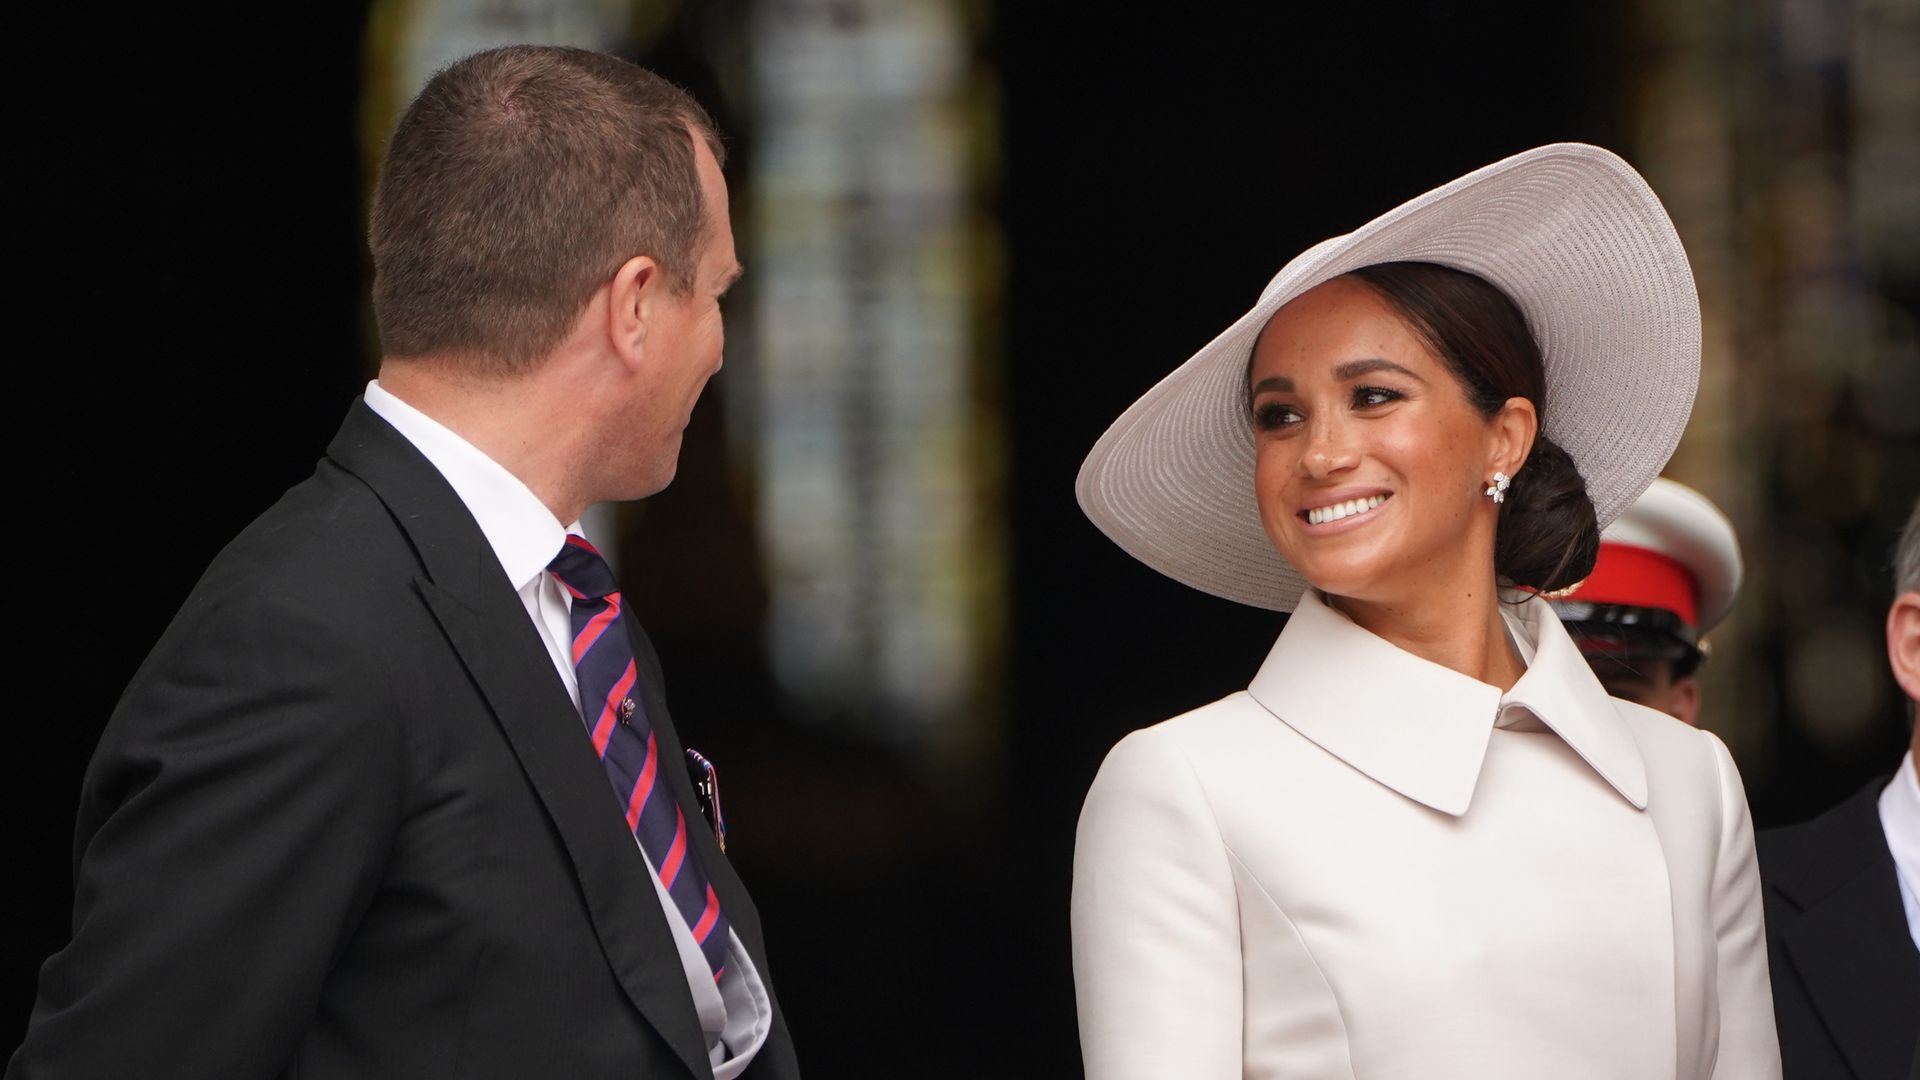 Meghan Markle smiling at Peter Phillips